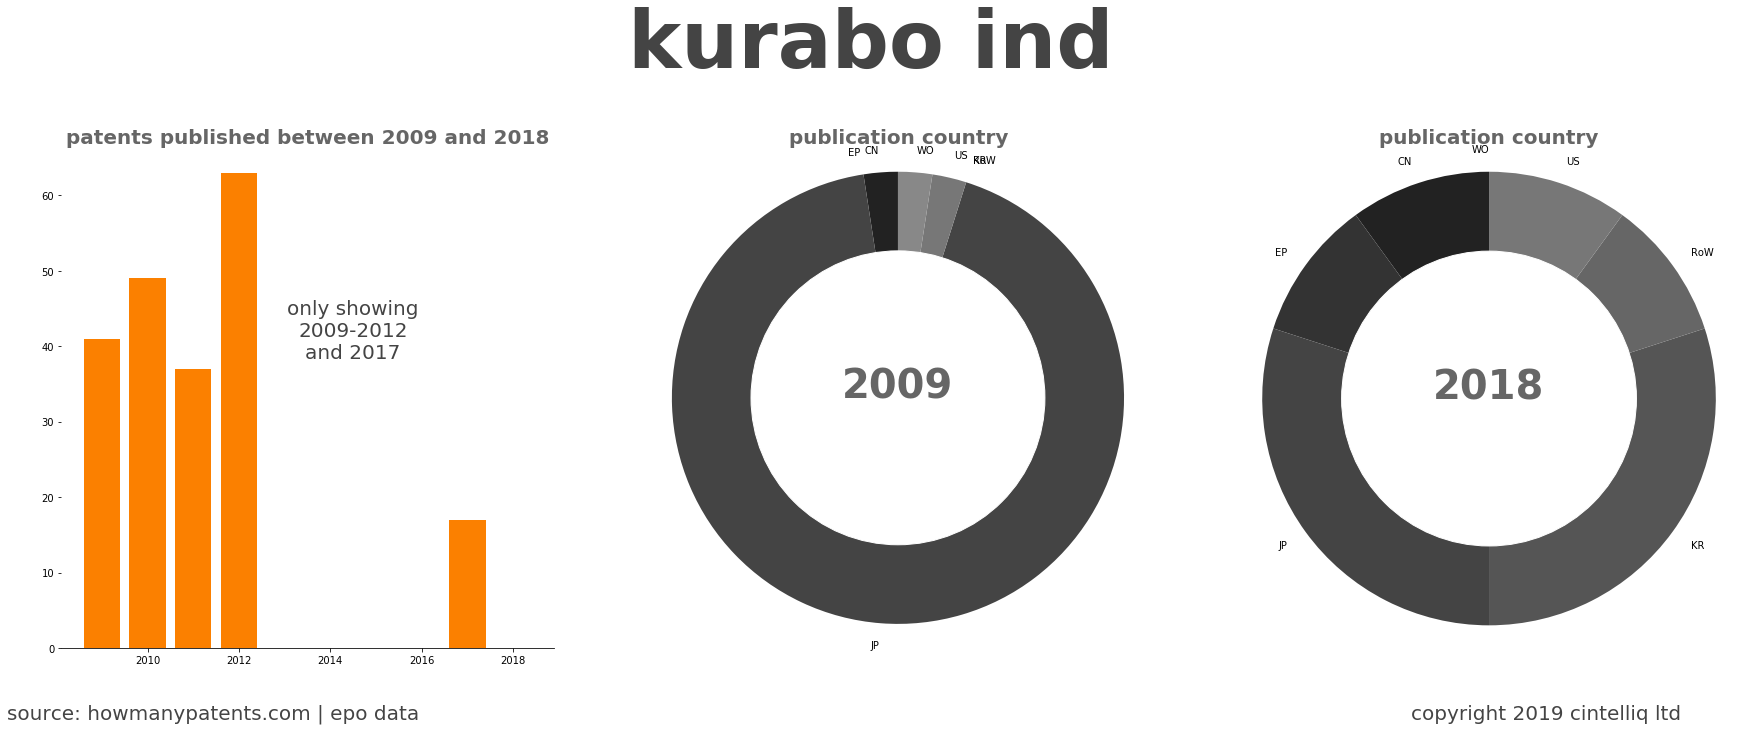 summary of patents for Kurabo Ind